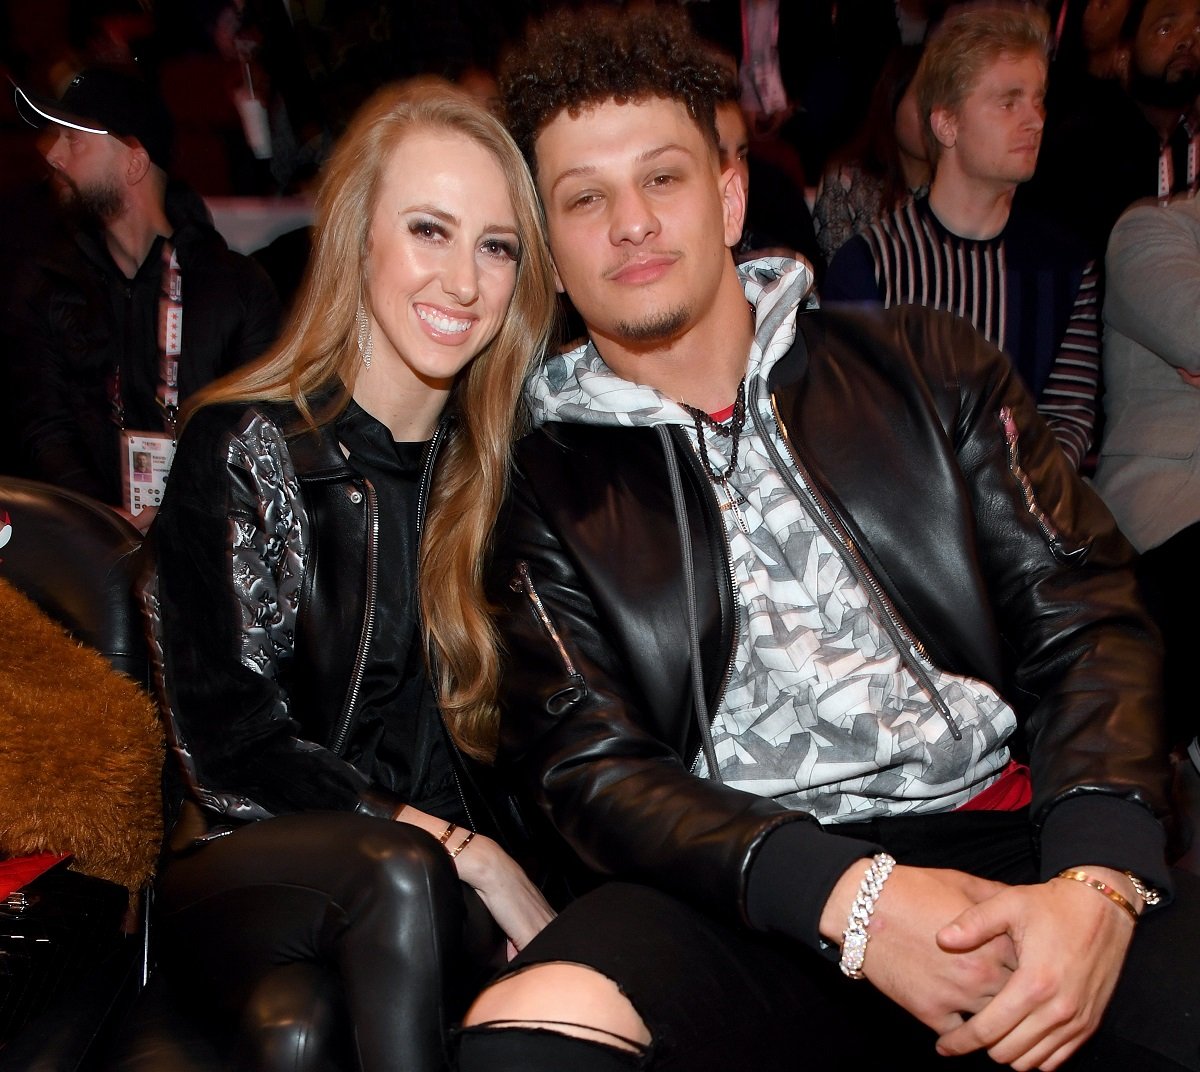 Brittany Matthews and Patrick Mahomes attend State Farm All-Star Saturday Night Event